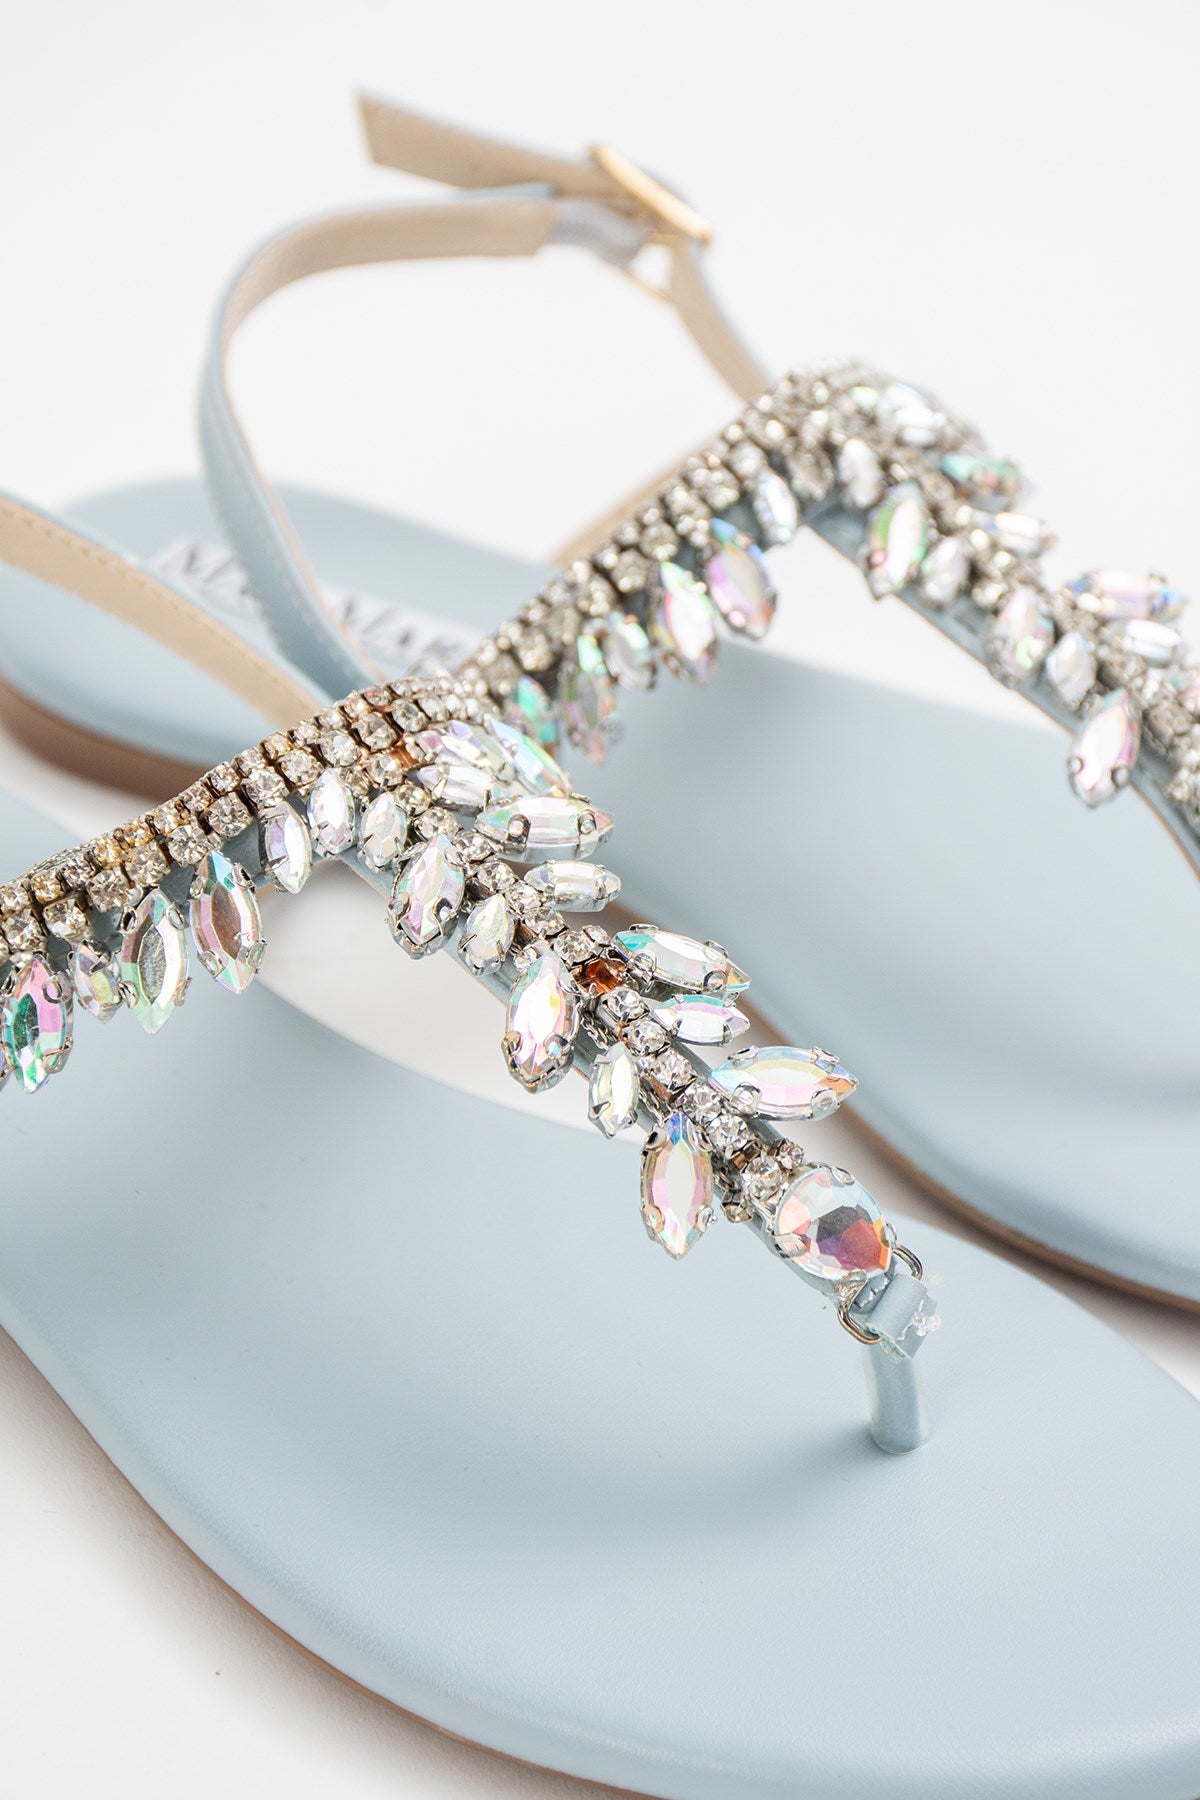 Istanbul Baby Blue Sandals